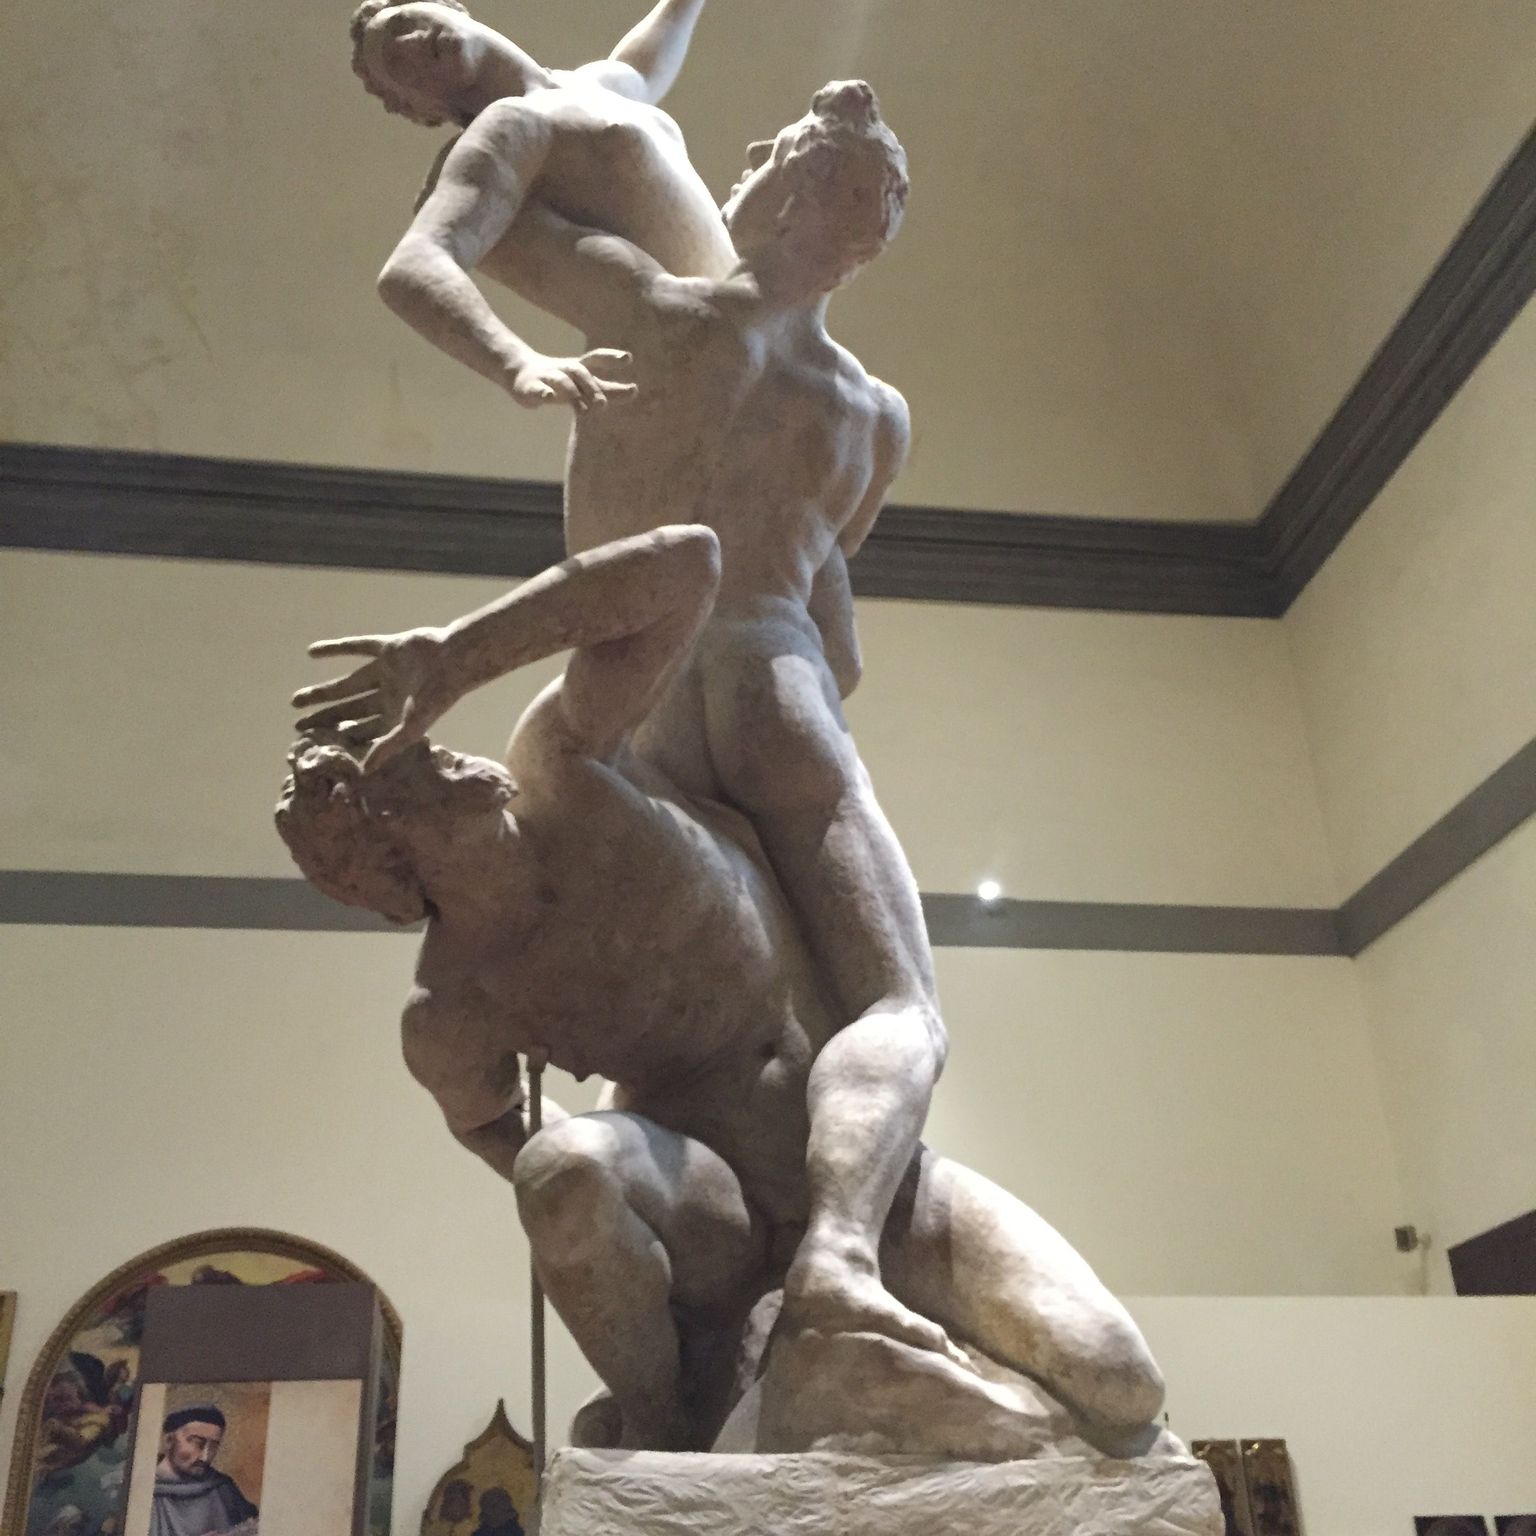 Plaster cast of the marble statue The Rape of the Sabine Women.